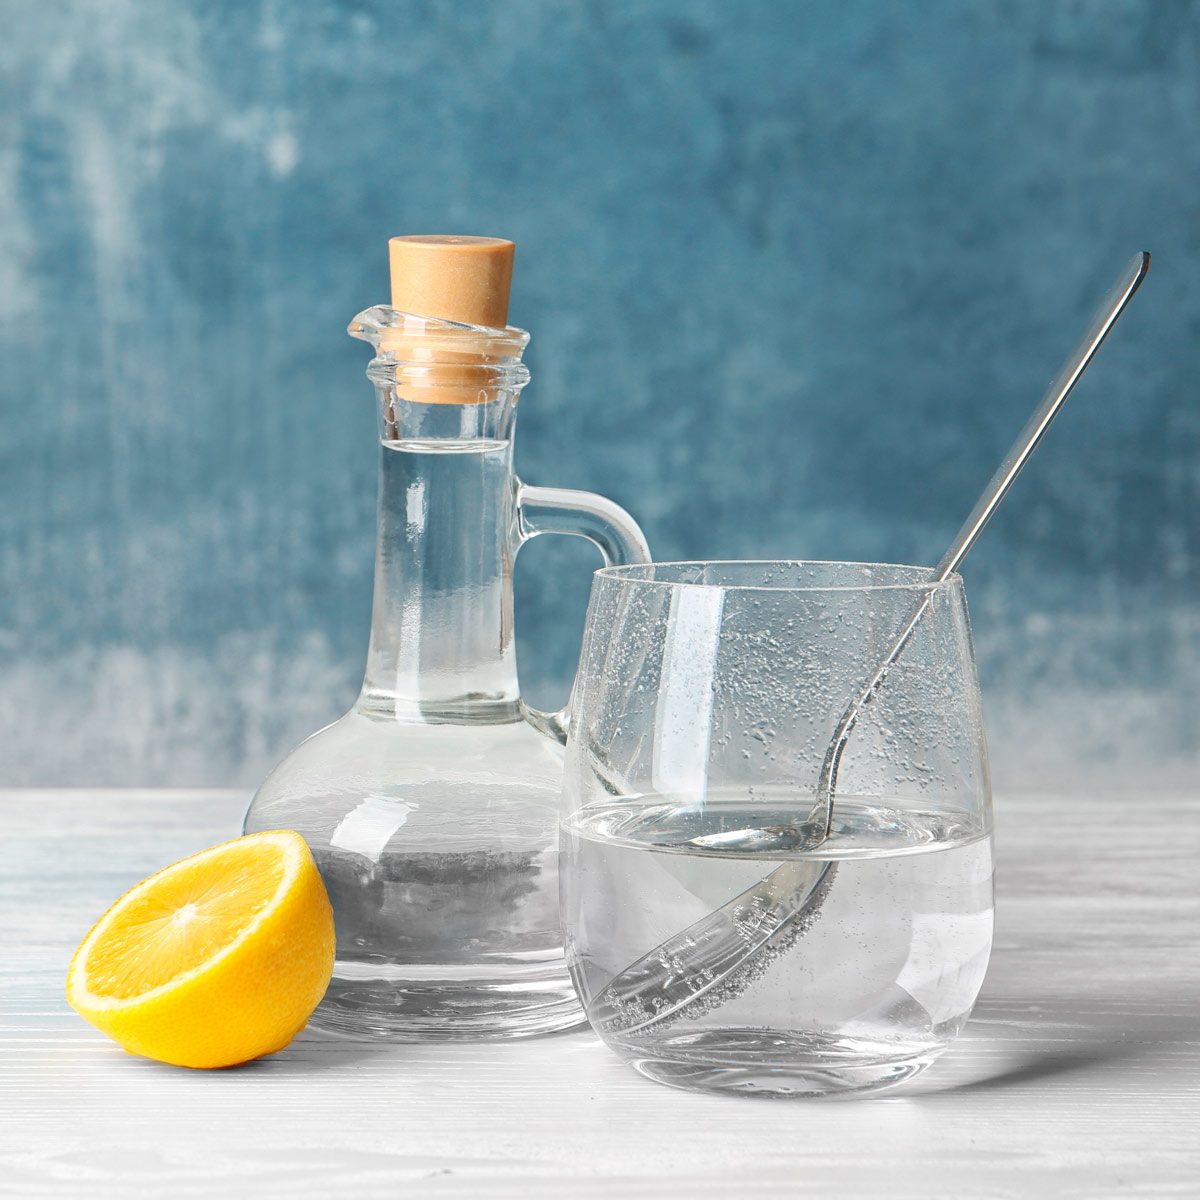 The Best Vinegar for Cleaning: 7 Types of Vinegar You Should Know - Bob Vila